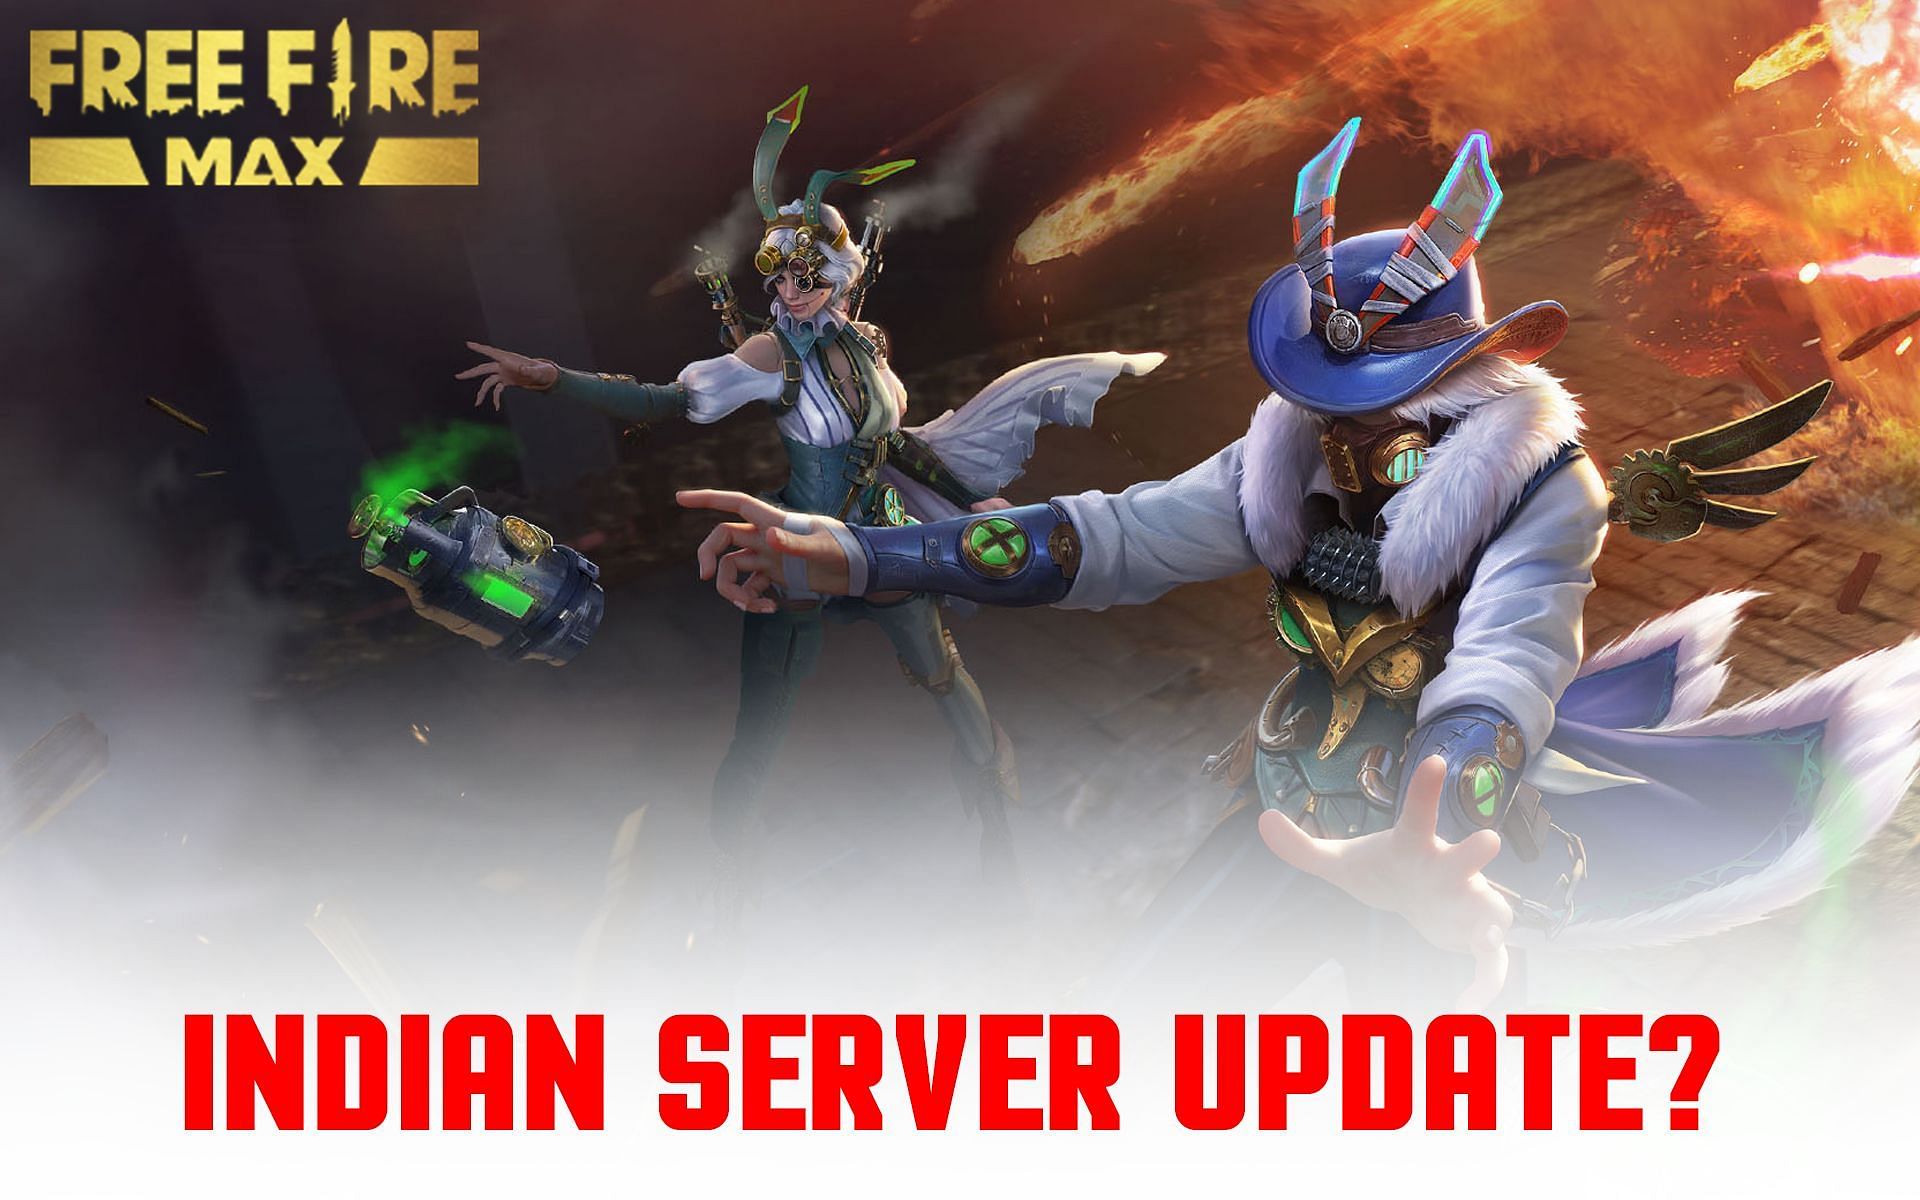 The update for the Indian Server of Free Fire MAX is arriving soon (Image via Sportskeeda)